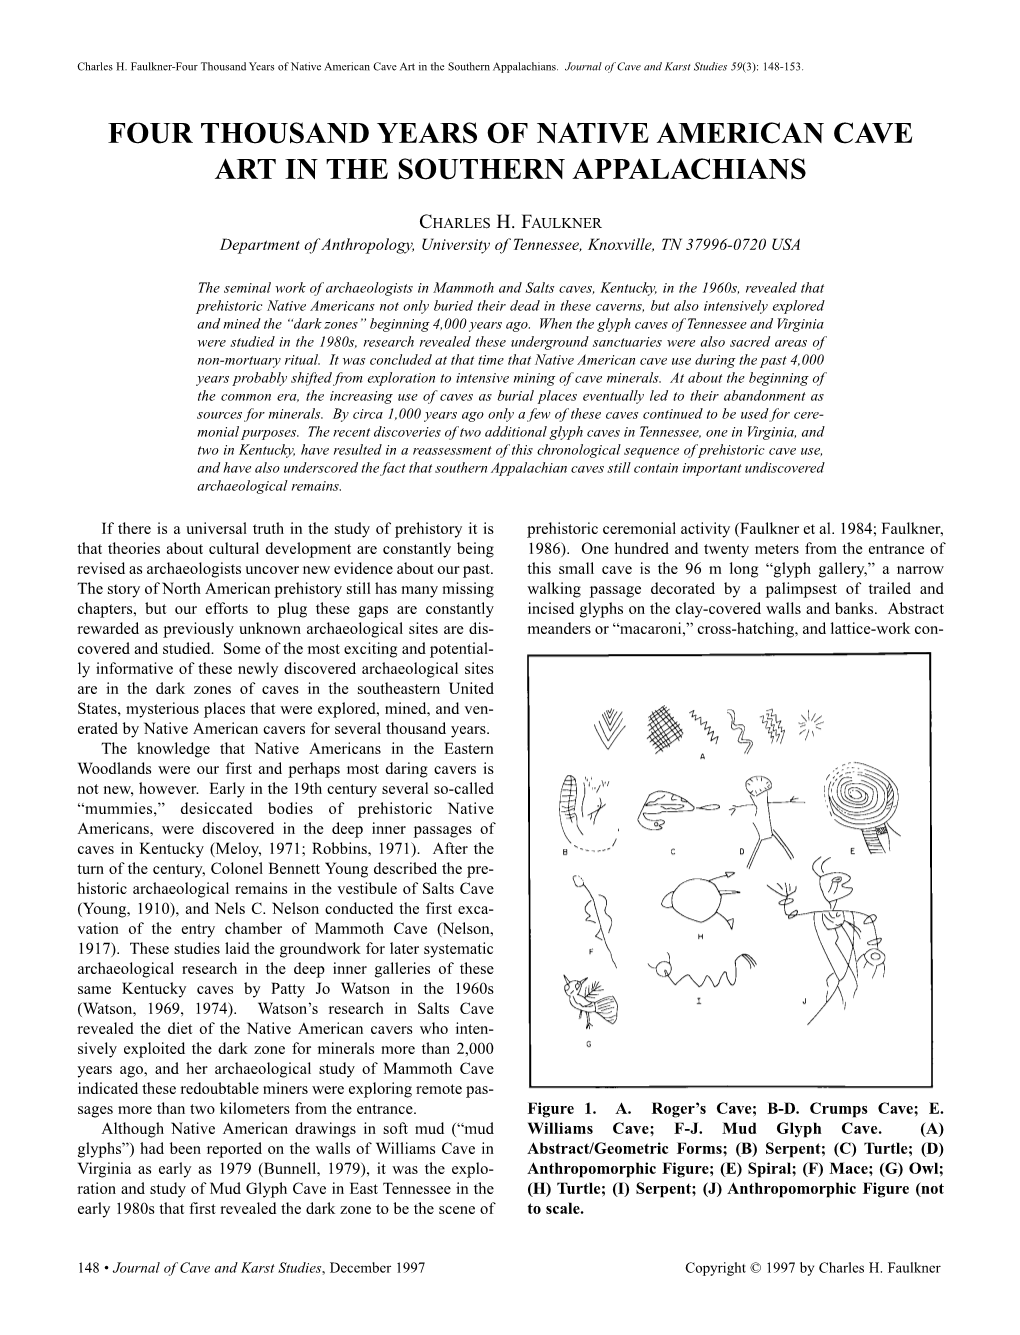 Four Thousand Years of Native American Cave Art in the Southern Appalachians